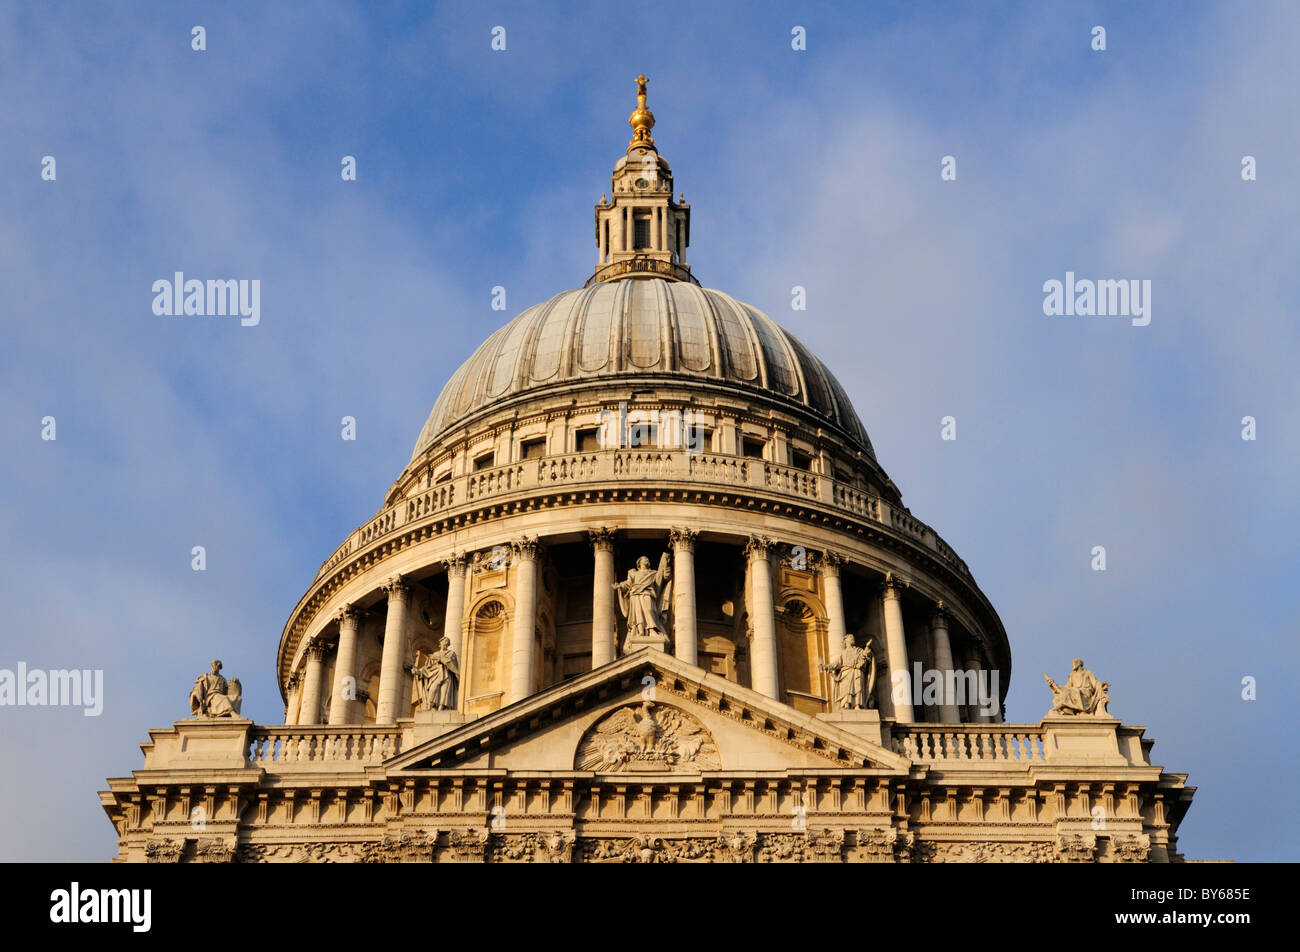 Domed Roof of St Pauls Cathedral, London, England, UK Stock Photo